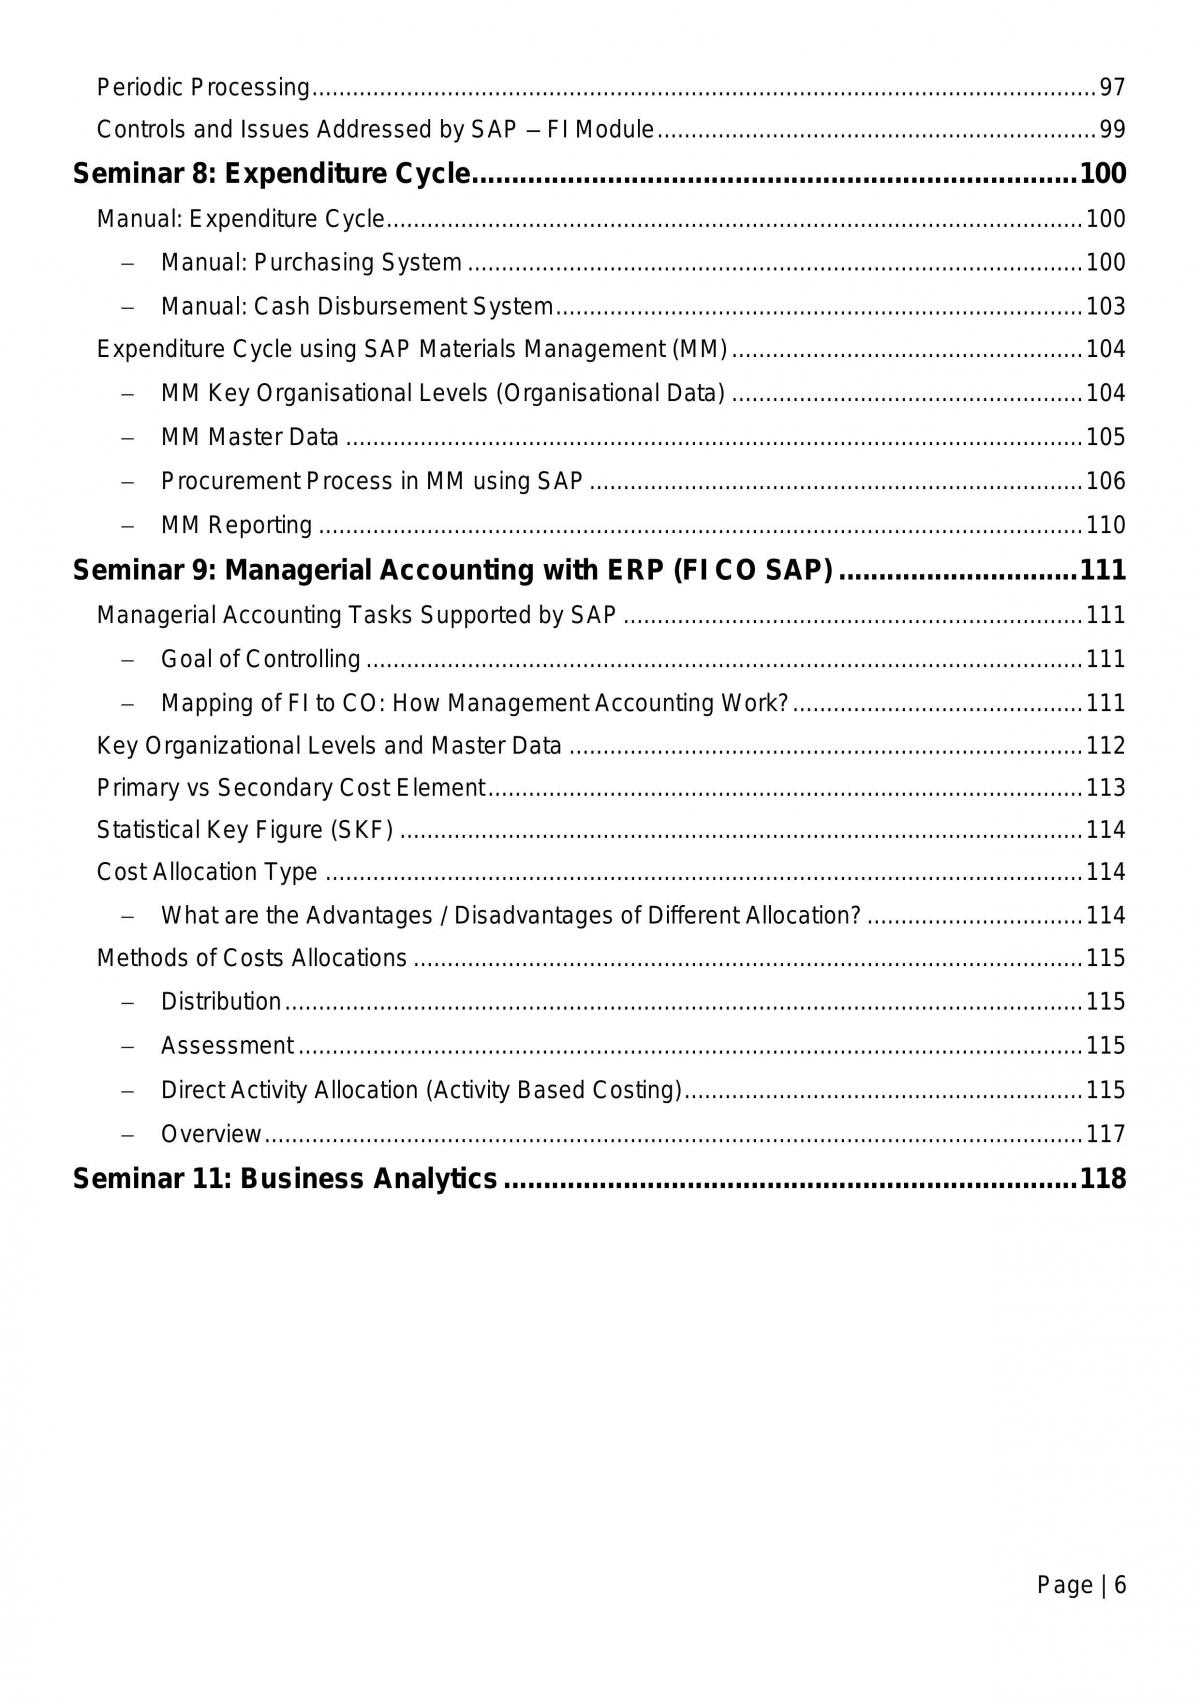 Complete study notes for AC2401 - Page 6